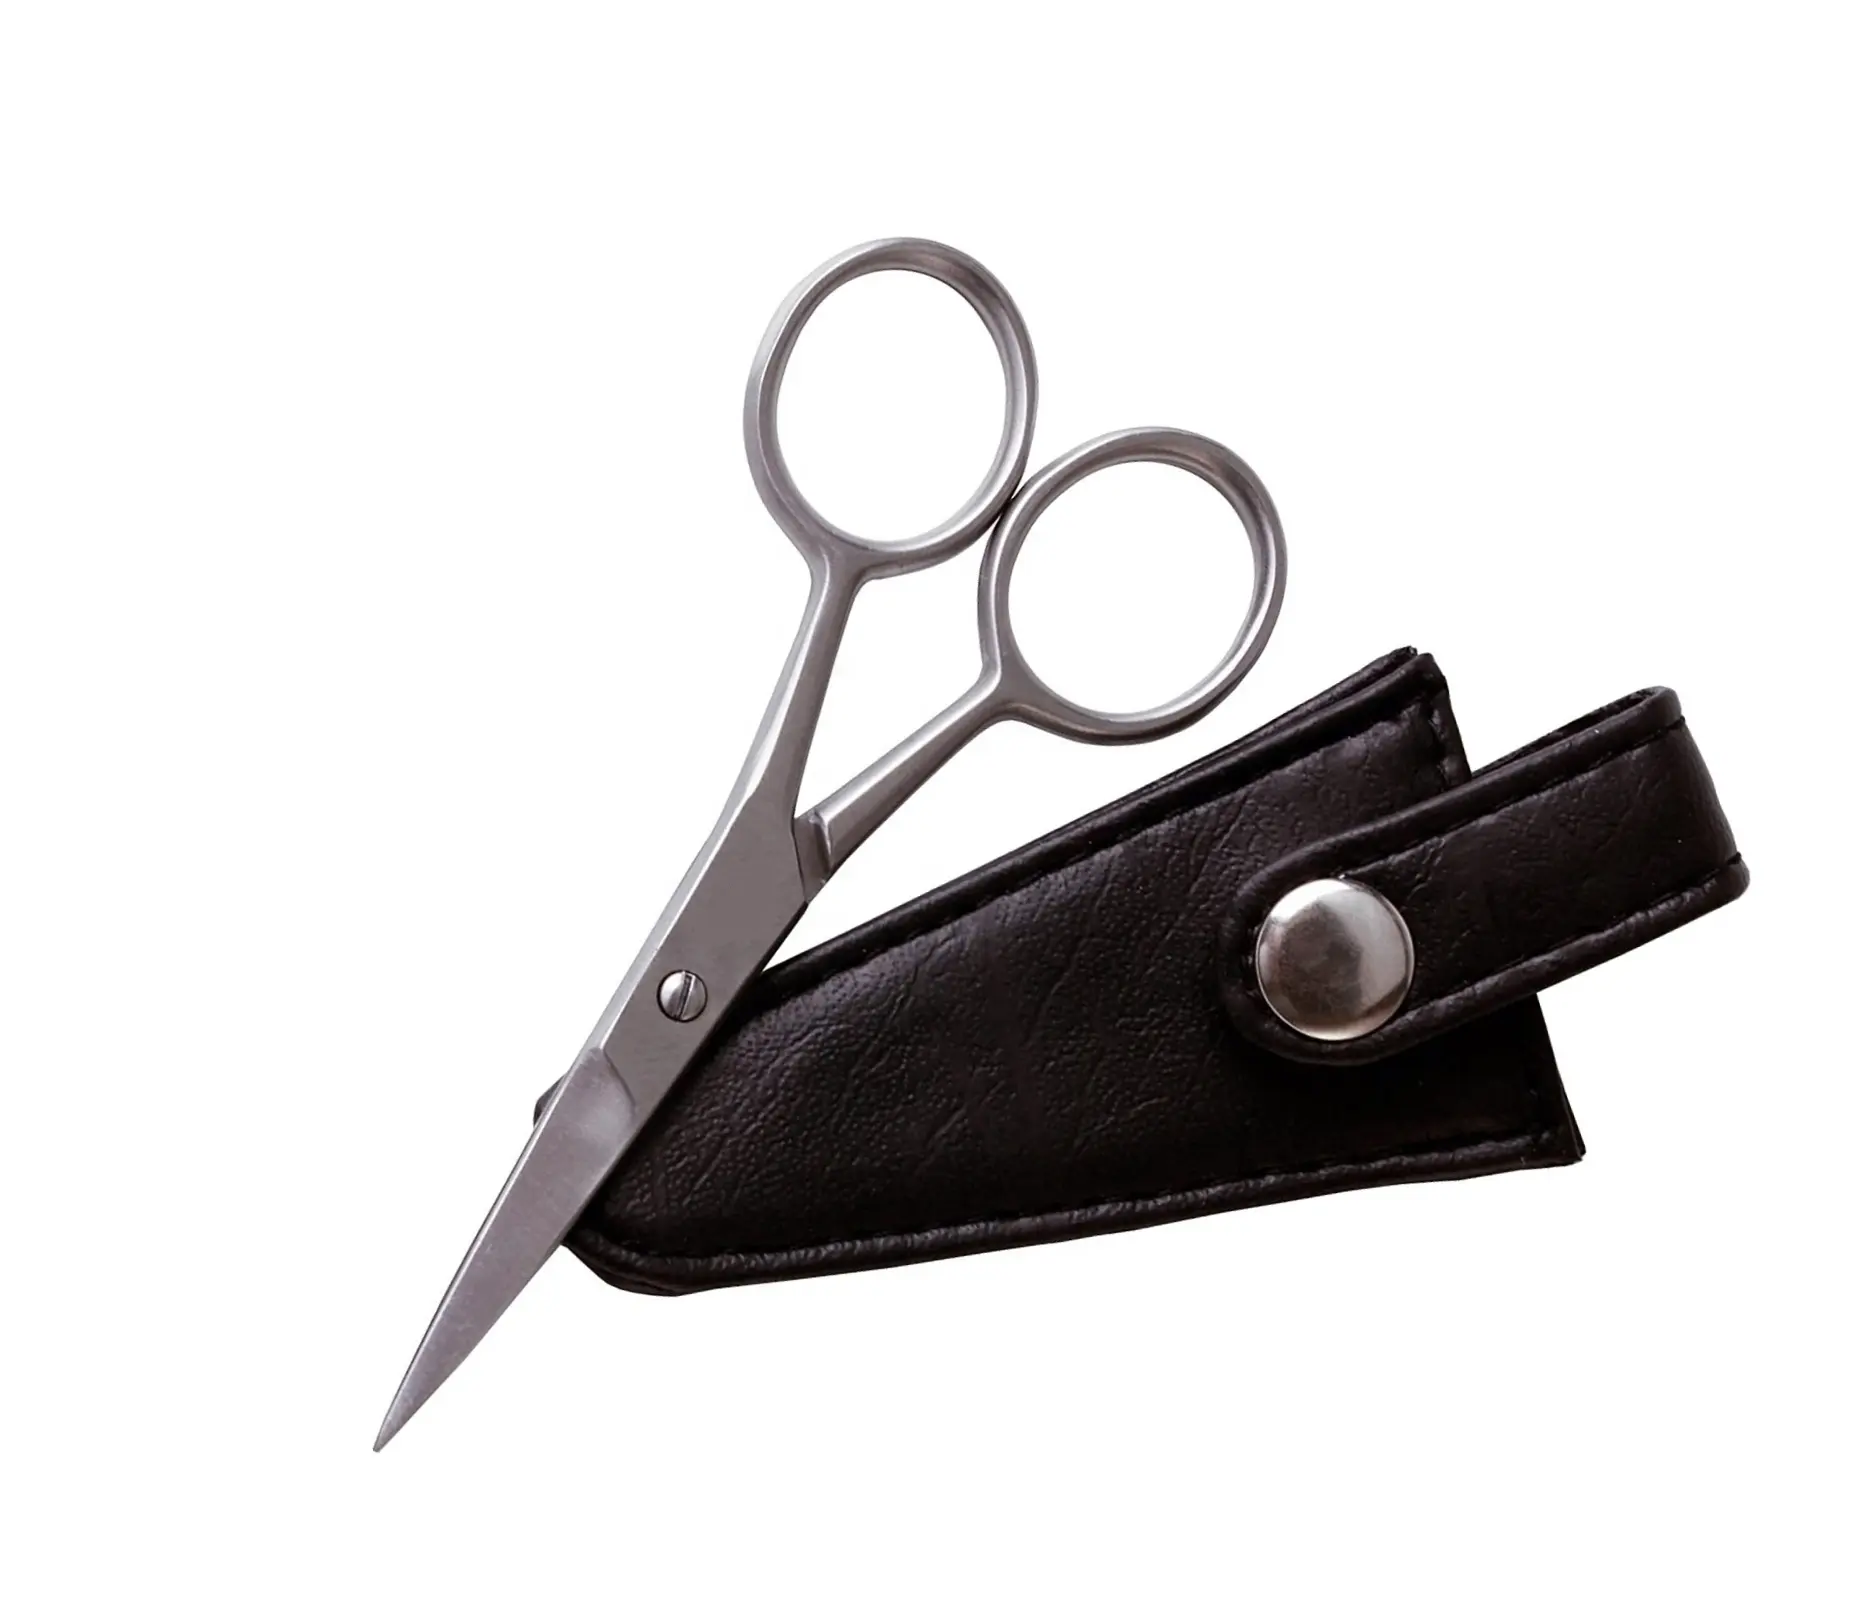 Beard & Mustache Scissors Sharp Small Facial Hair Trimming Shears in Leathers Case